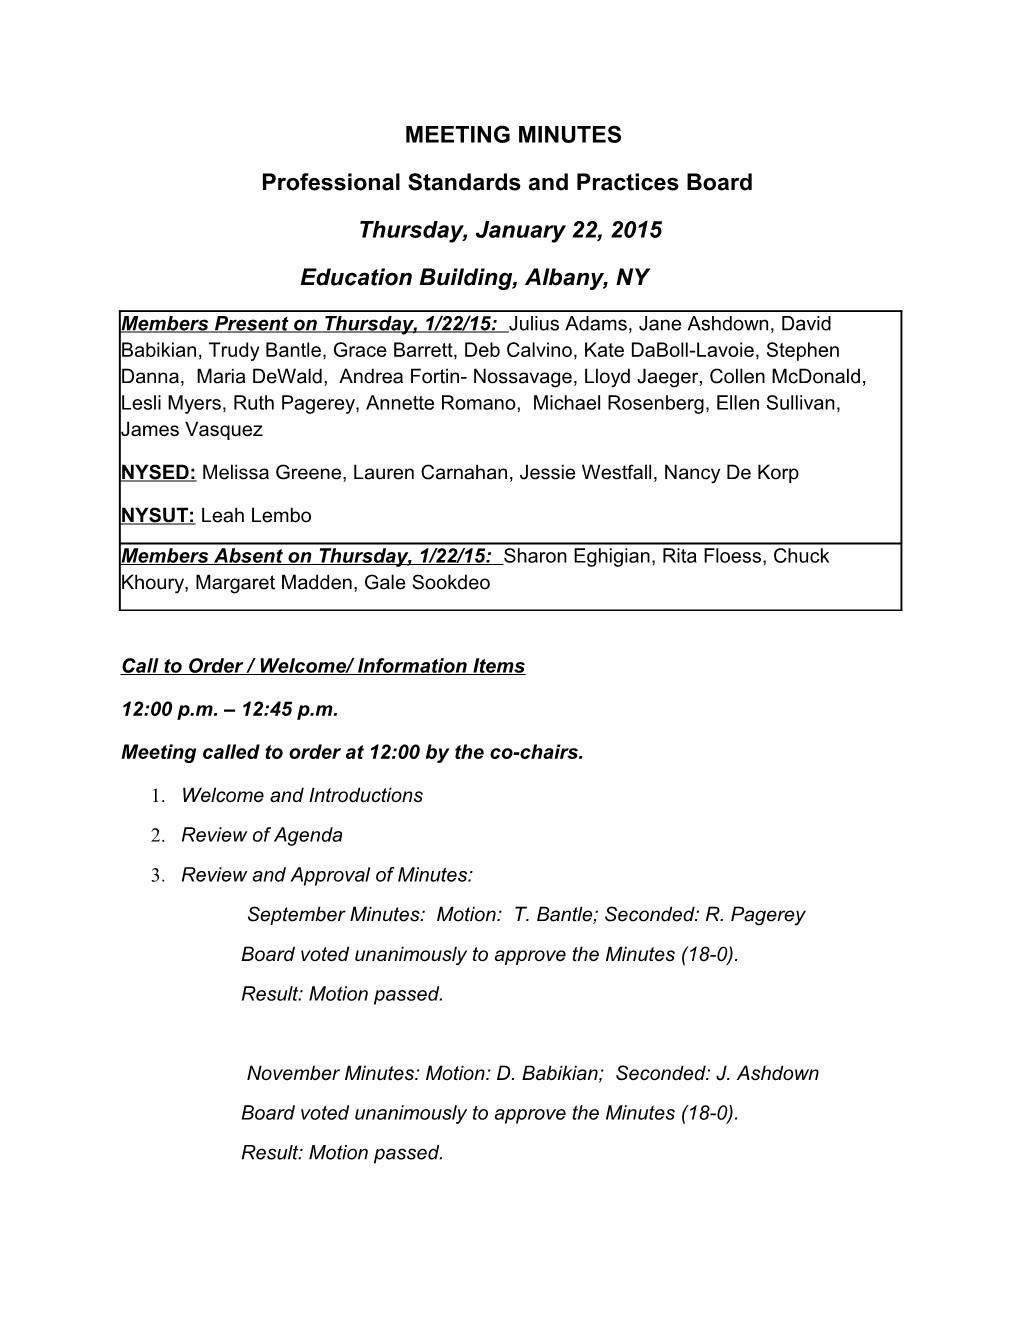 Professional Standards and Practices Board